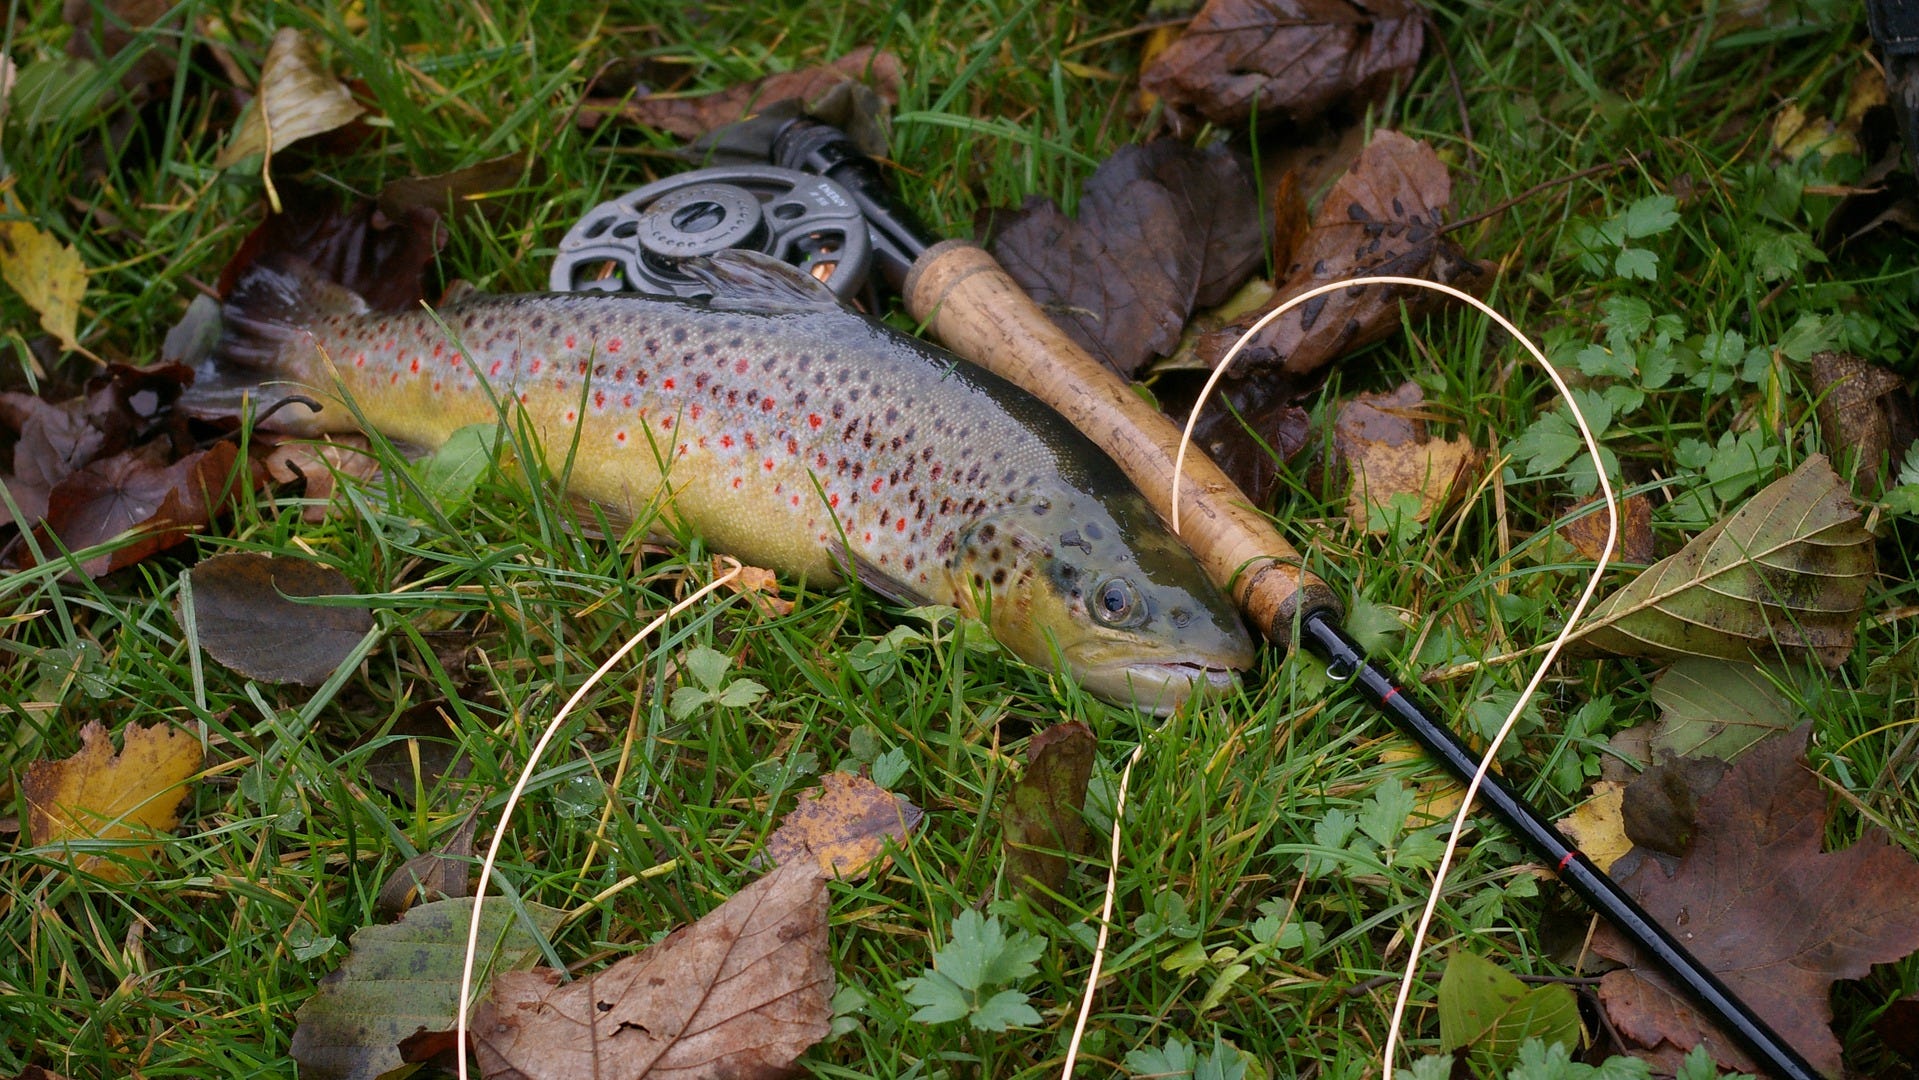 Fulkerson Winery, in partnership with the Glenora School of Fly Fishing, will be offering a 3-part fly tying series, and two seminars on Tactics for Spring Trout Fishing in February, March and April.